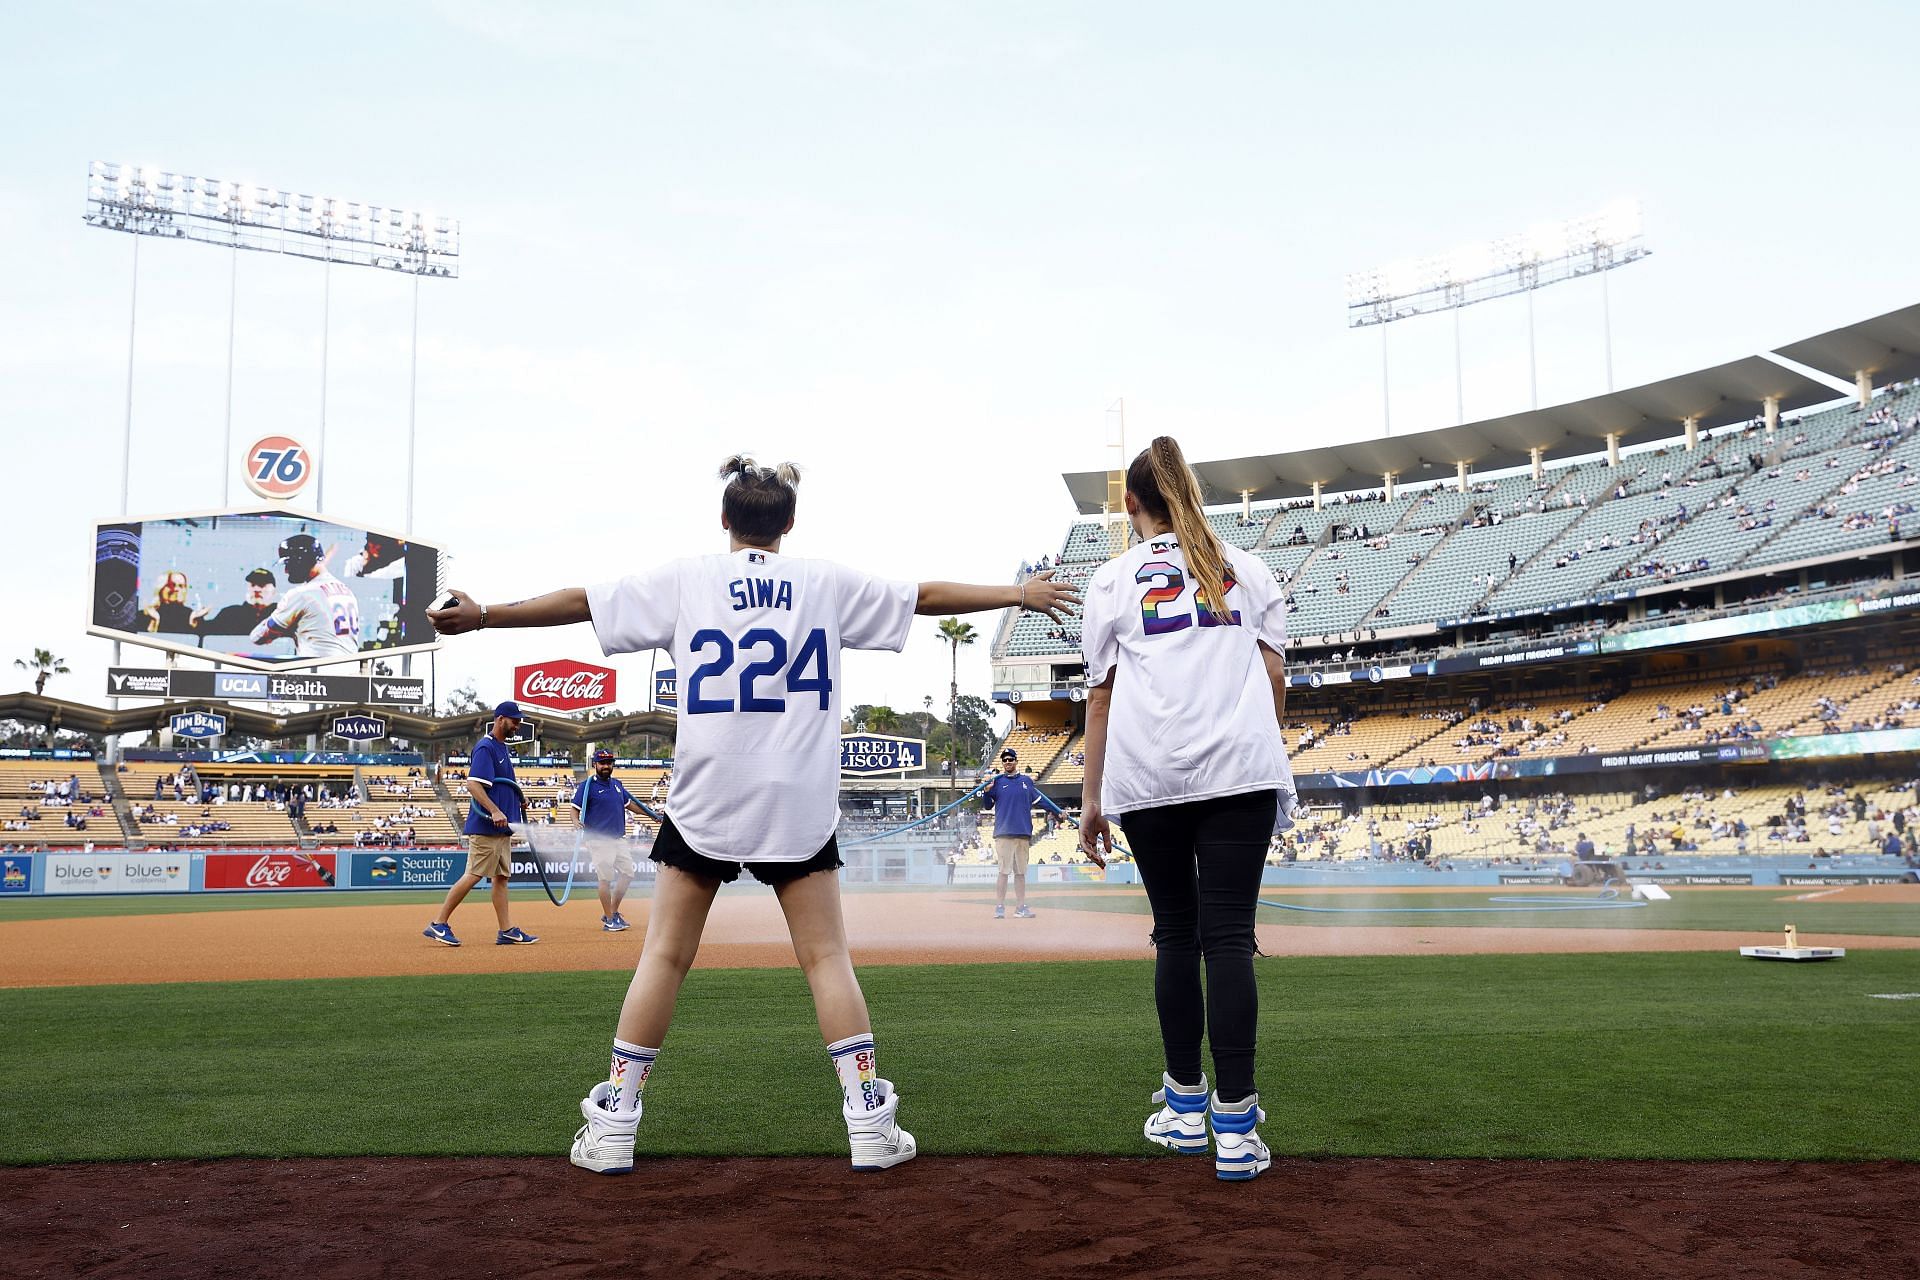 The Dodgers are hosting Pride Night